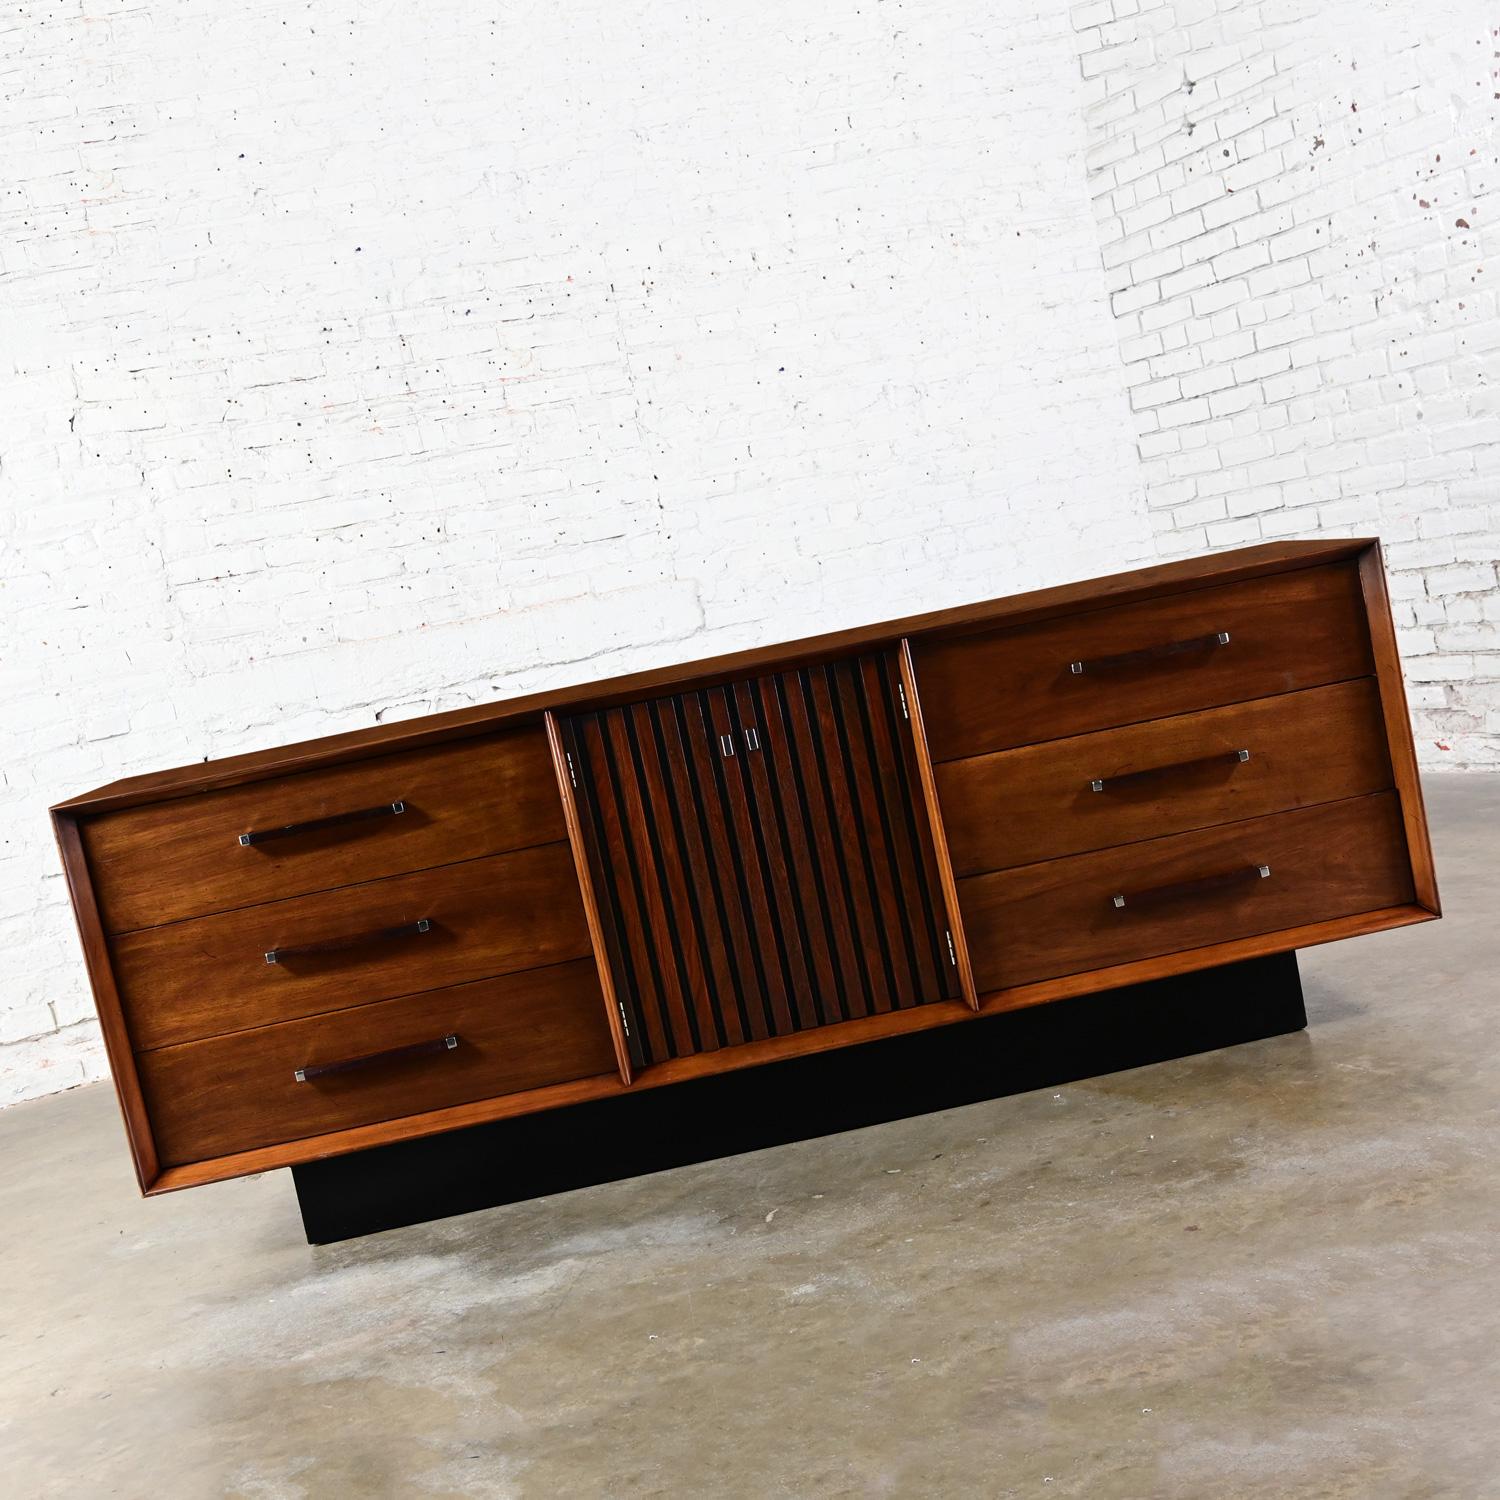 1971 MCM Lane Dresser Credenza Buffet Tower Suite Collection Walnut & Rosewood In Good Condition For Sale In Topeka, KS